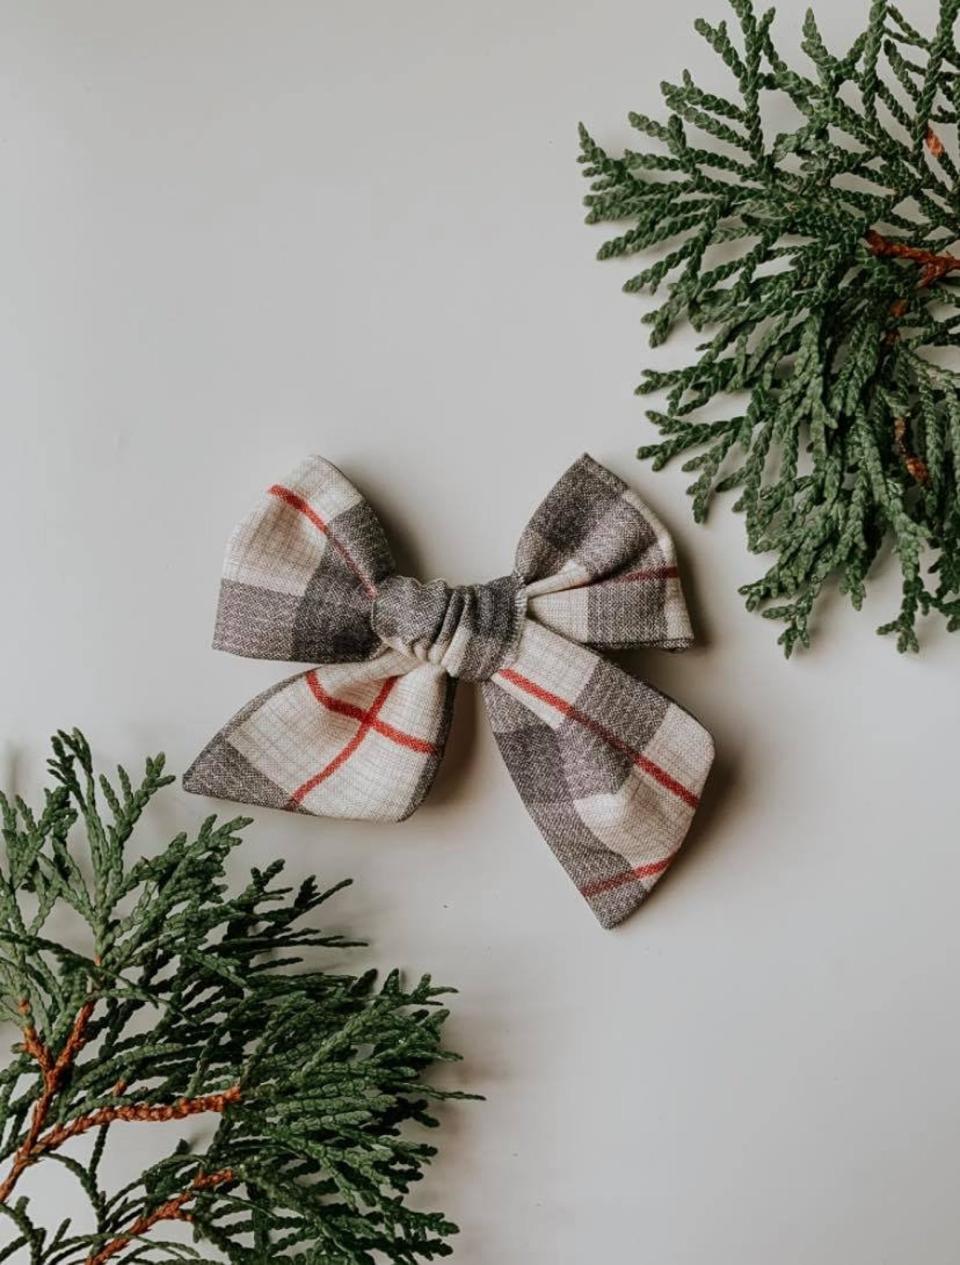 Sleigh Ride Bow by Wild Ivy Bows, from $3.50. 